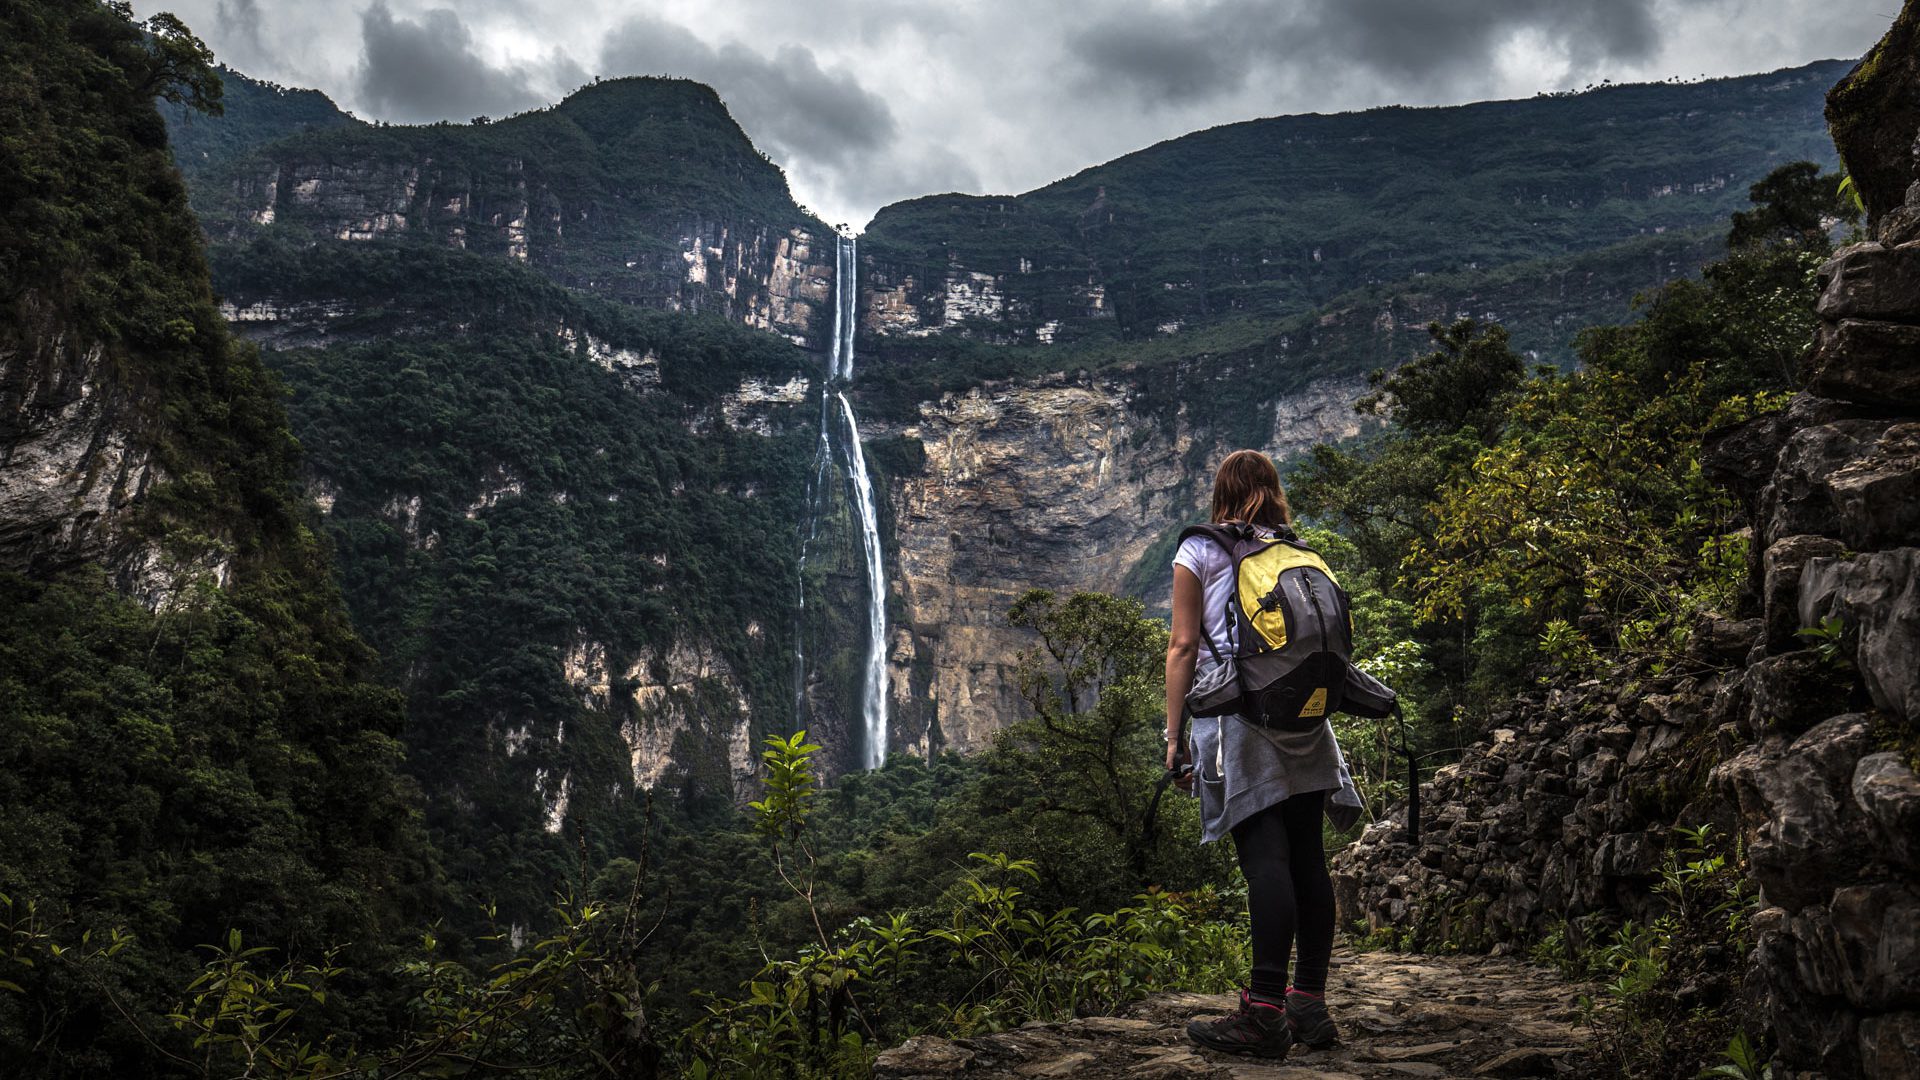 11Girl looking at Gocta waterfall from afar